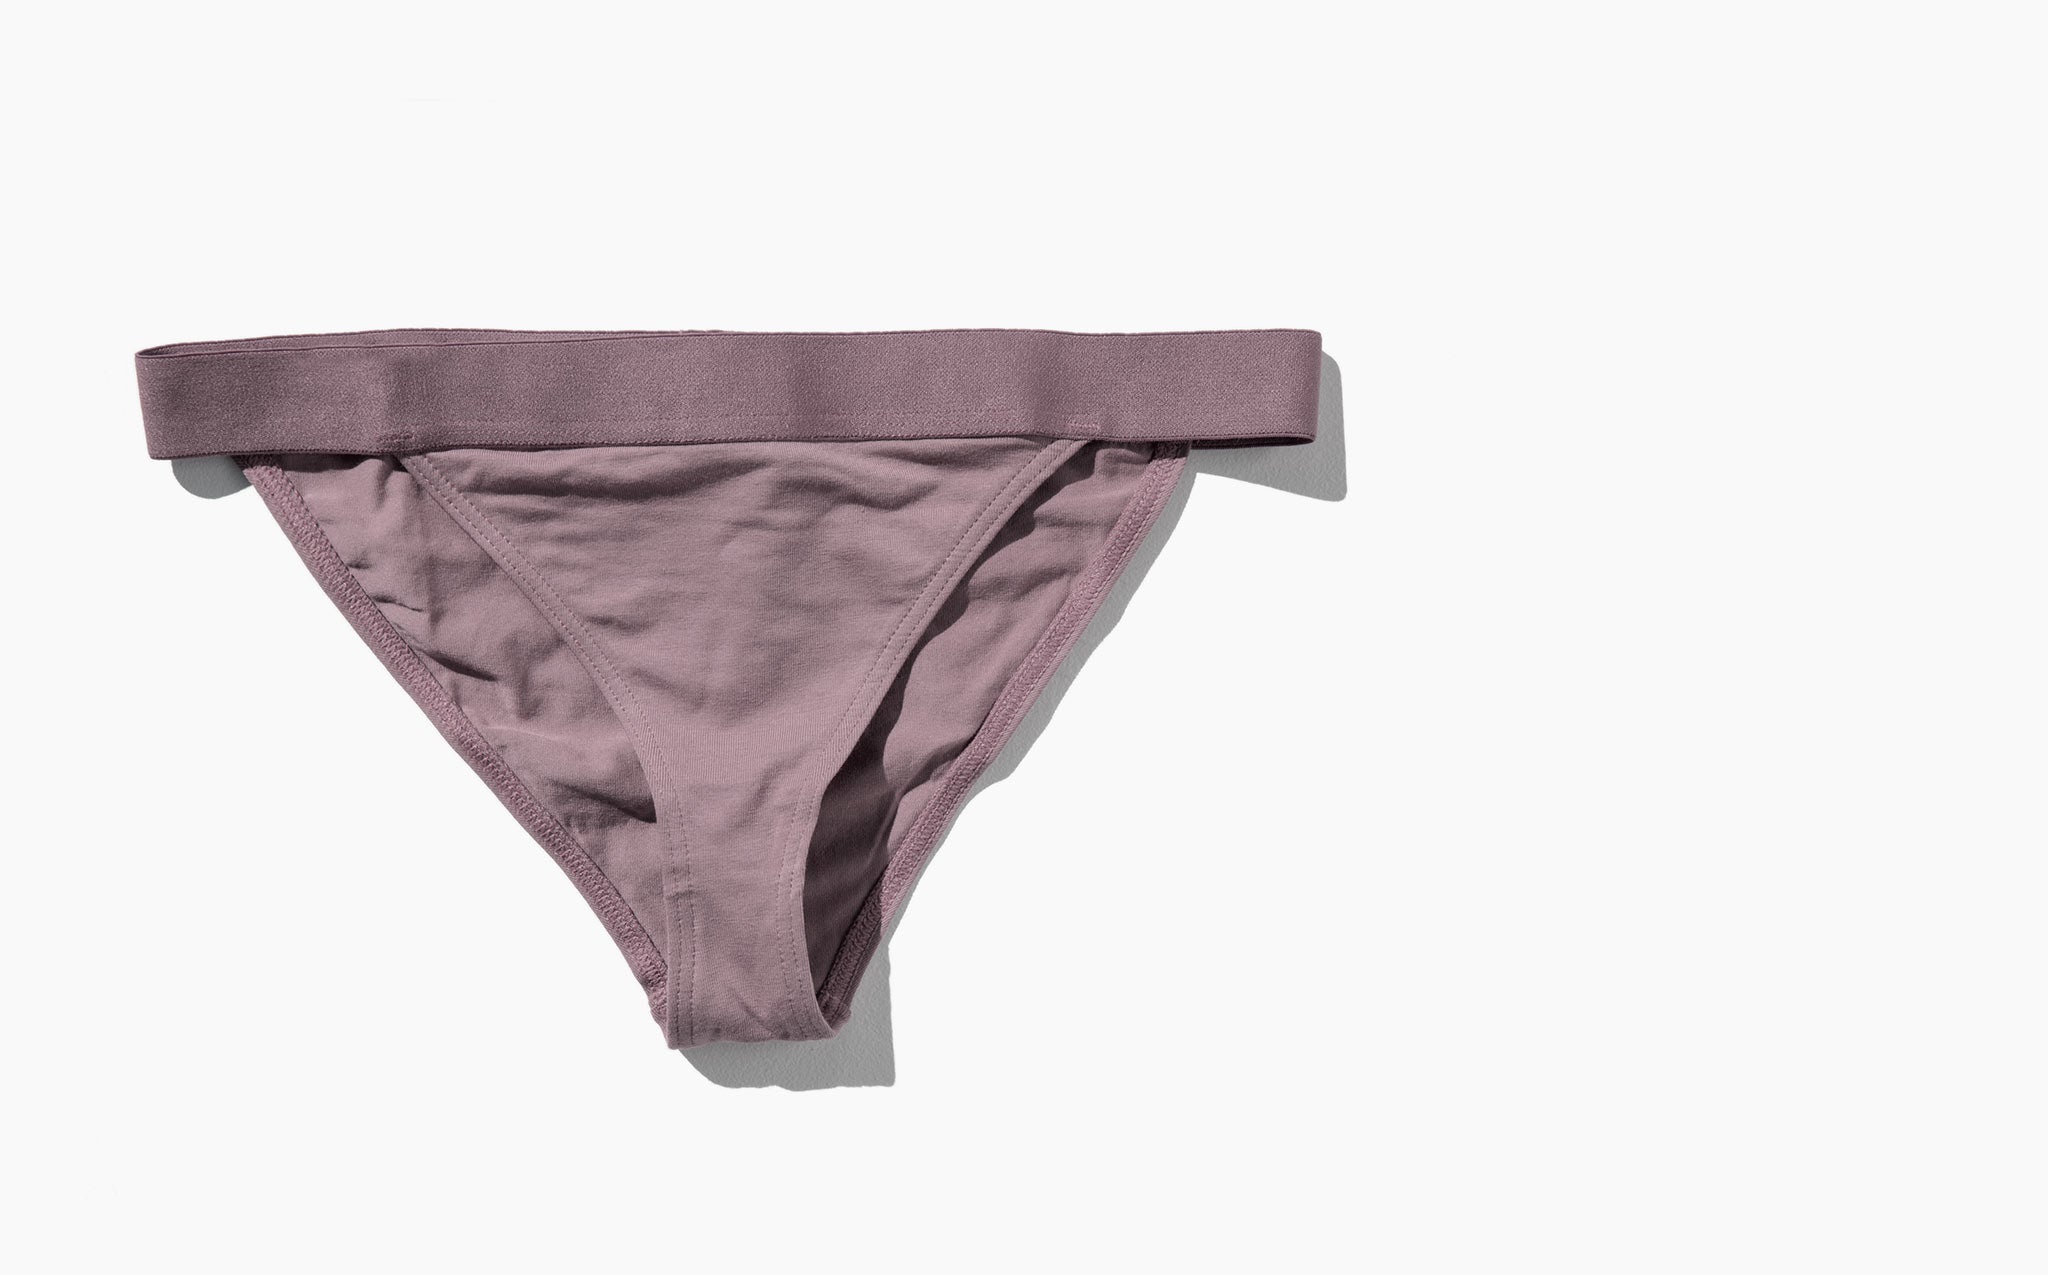 The Nude Label Taupe Triangle Brief